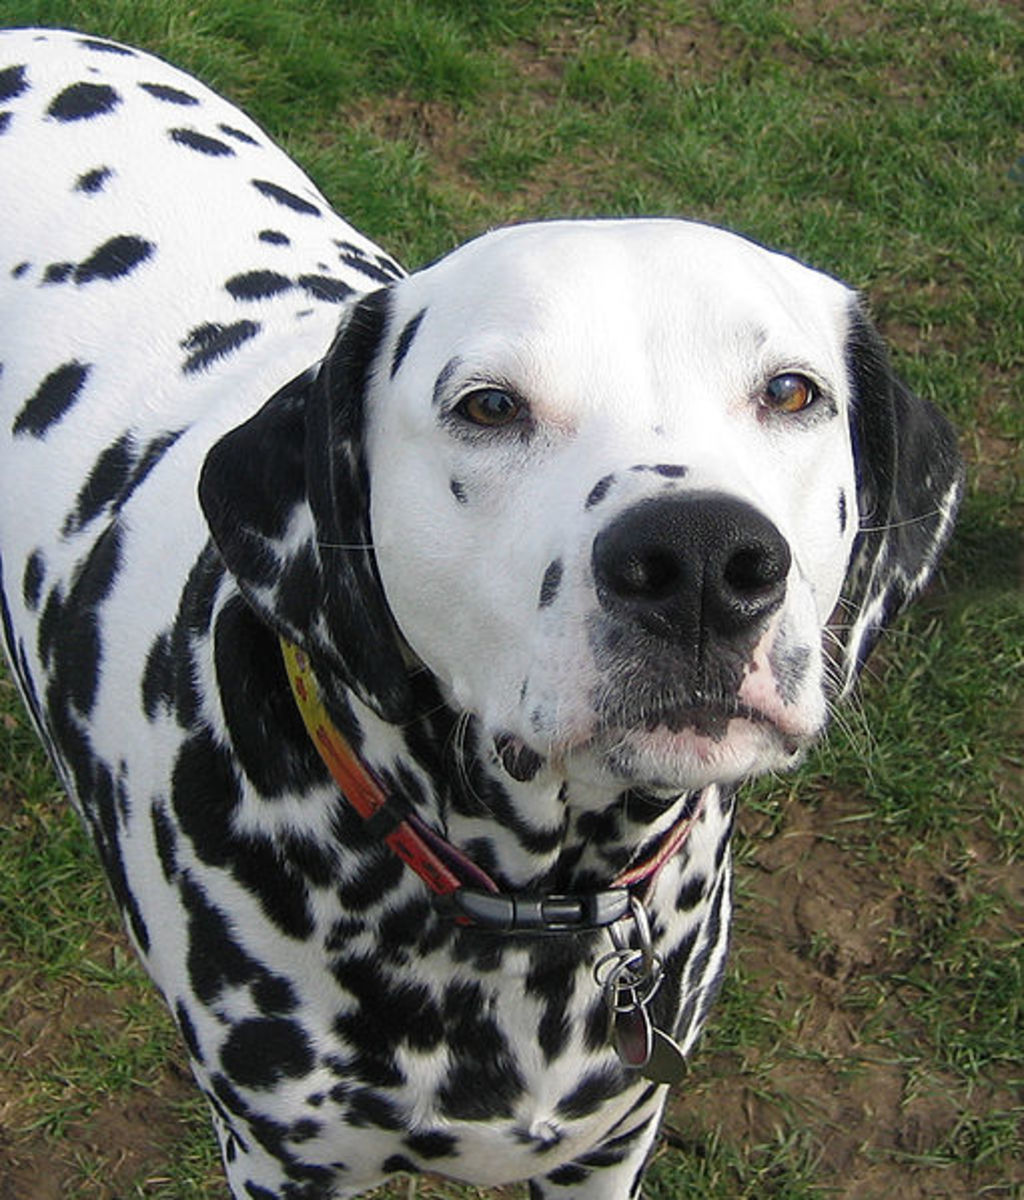 20 Dalmatians Syndrome Media Influence on Pet Owners   Soapboxie